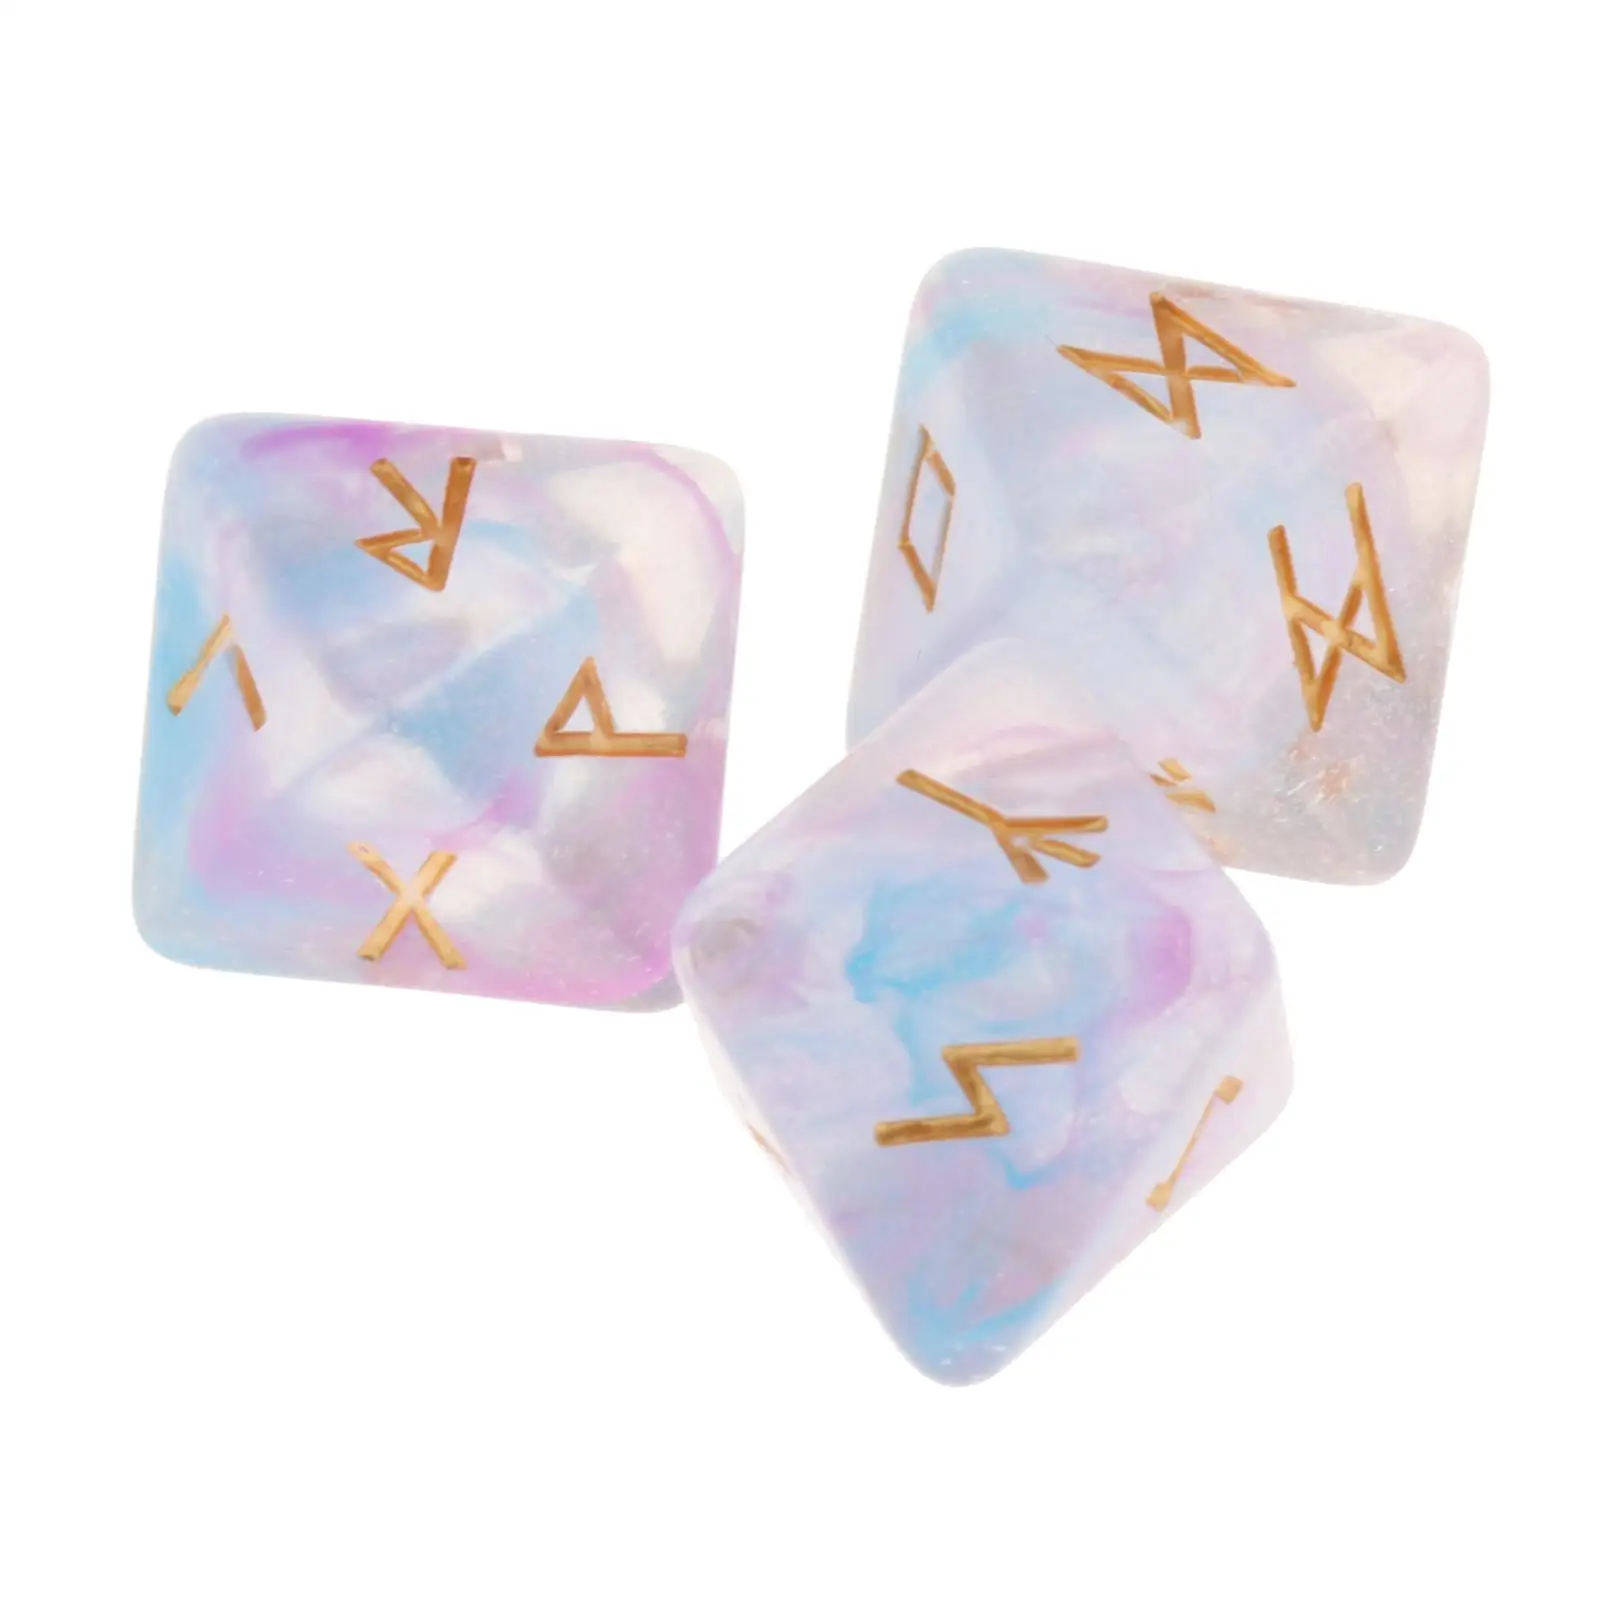 Starry Star Rune Resin Tarot Exquisite Divination Dice Constellation for